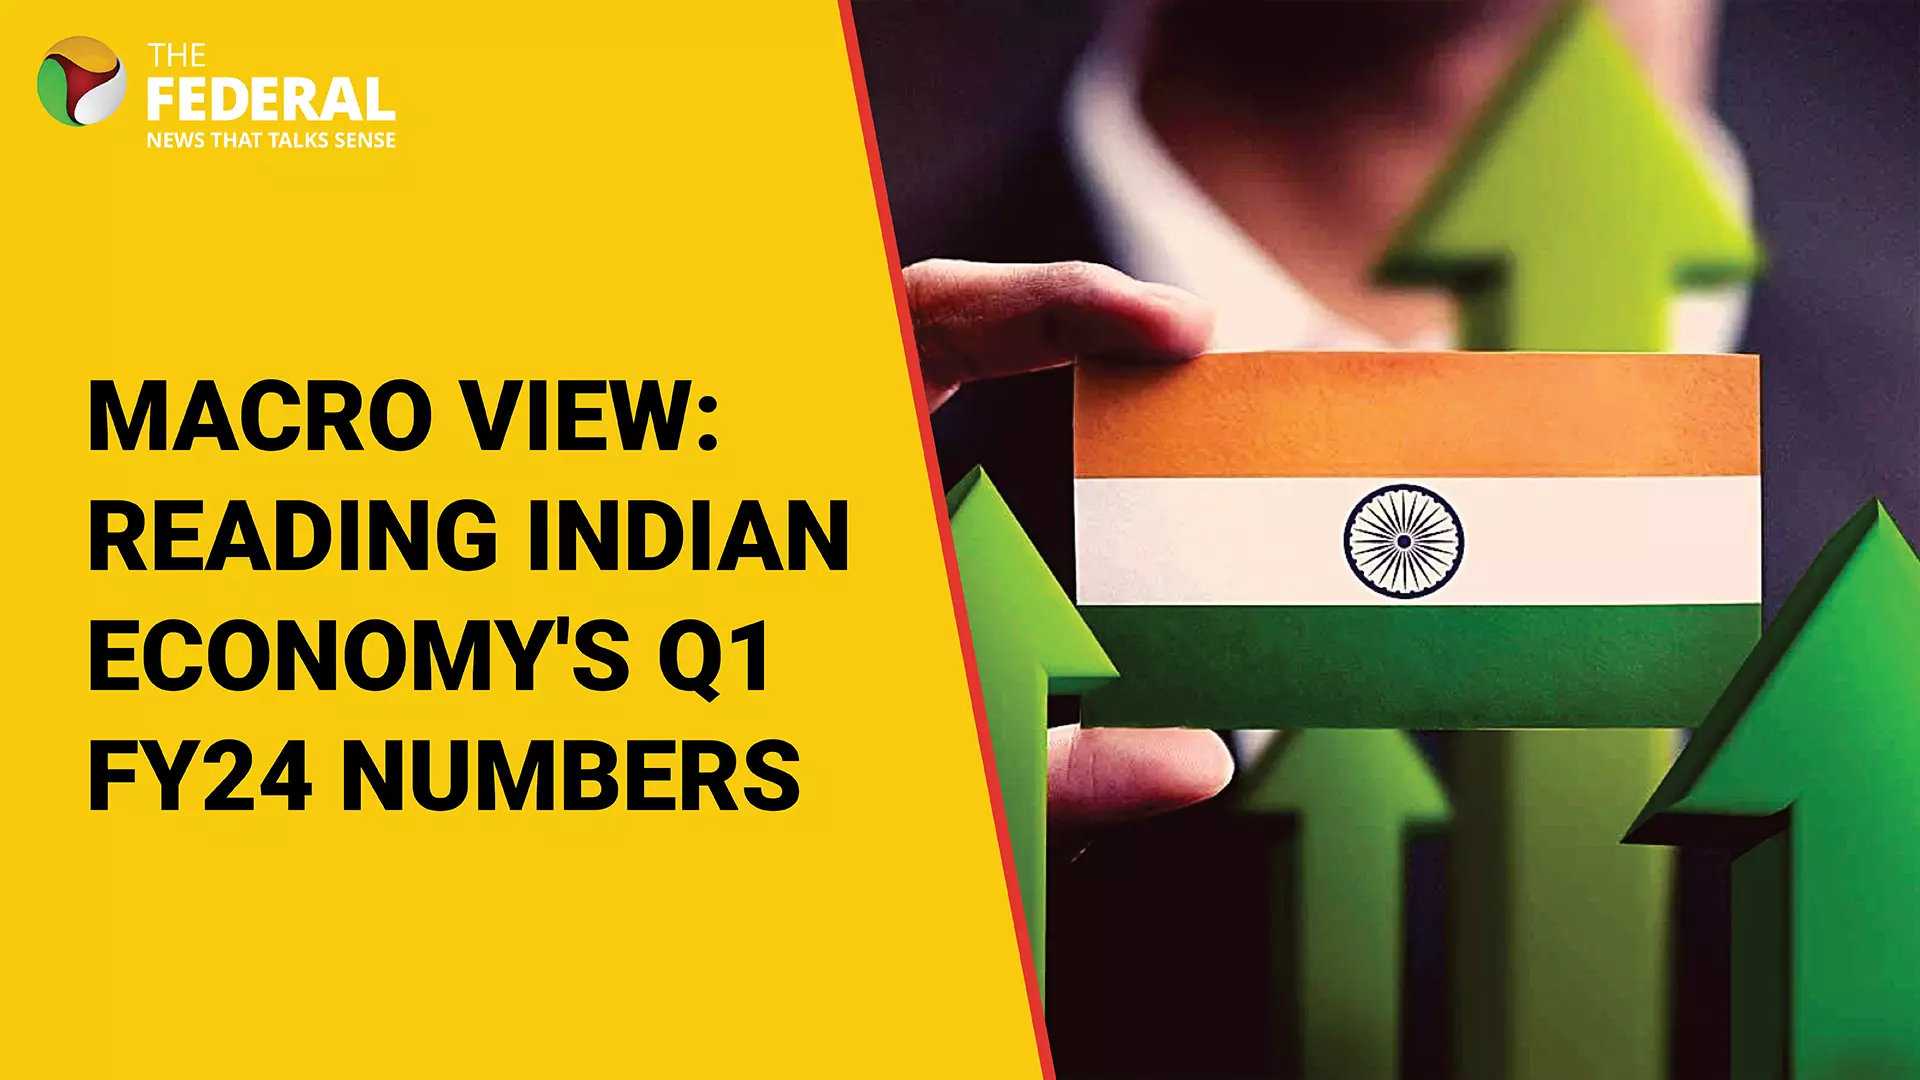 Macro view: Reading Indian economys Q1 FY24 numbers